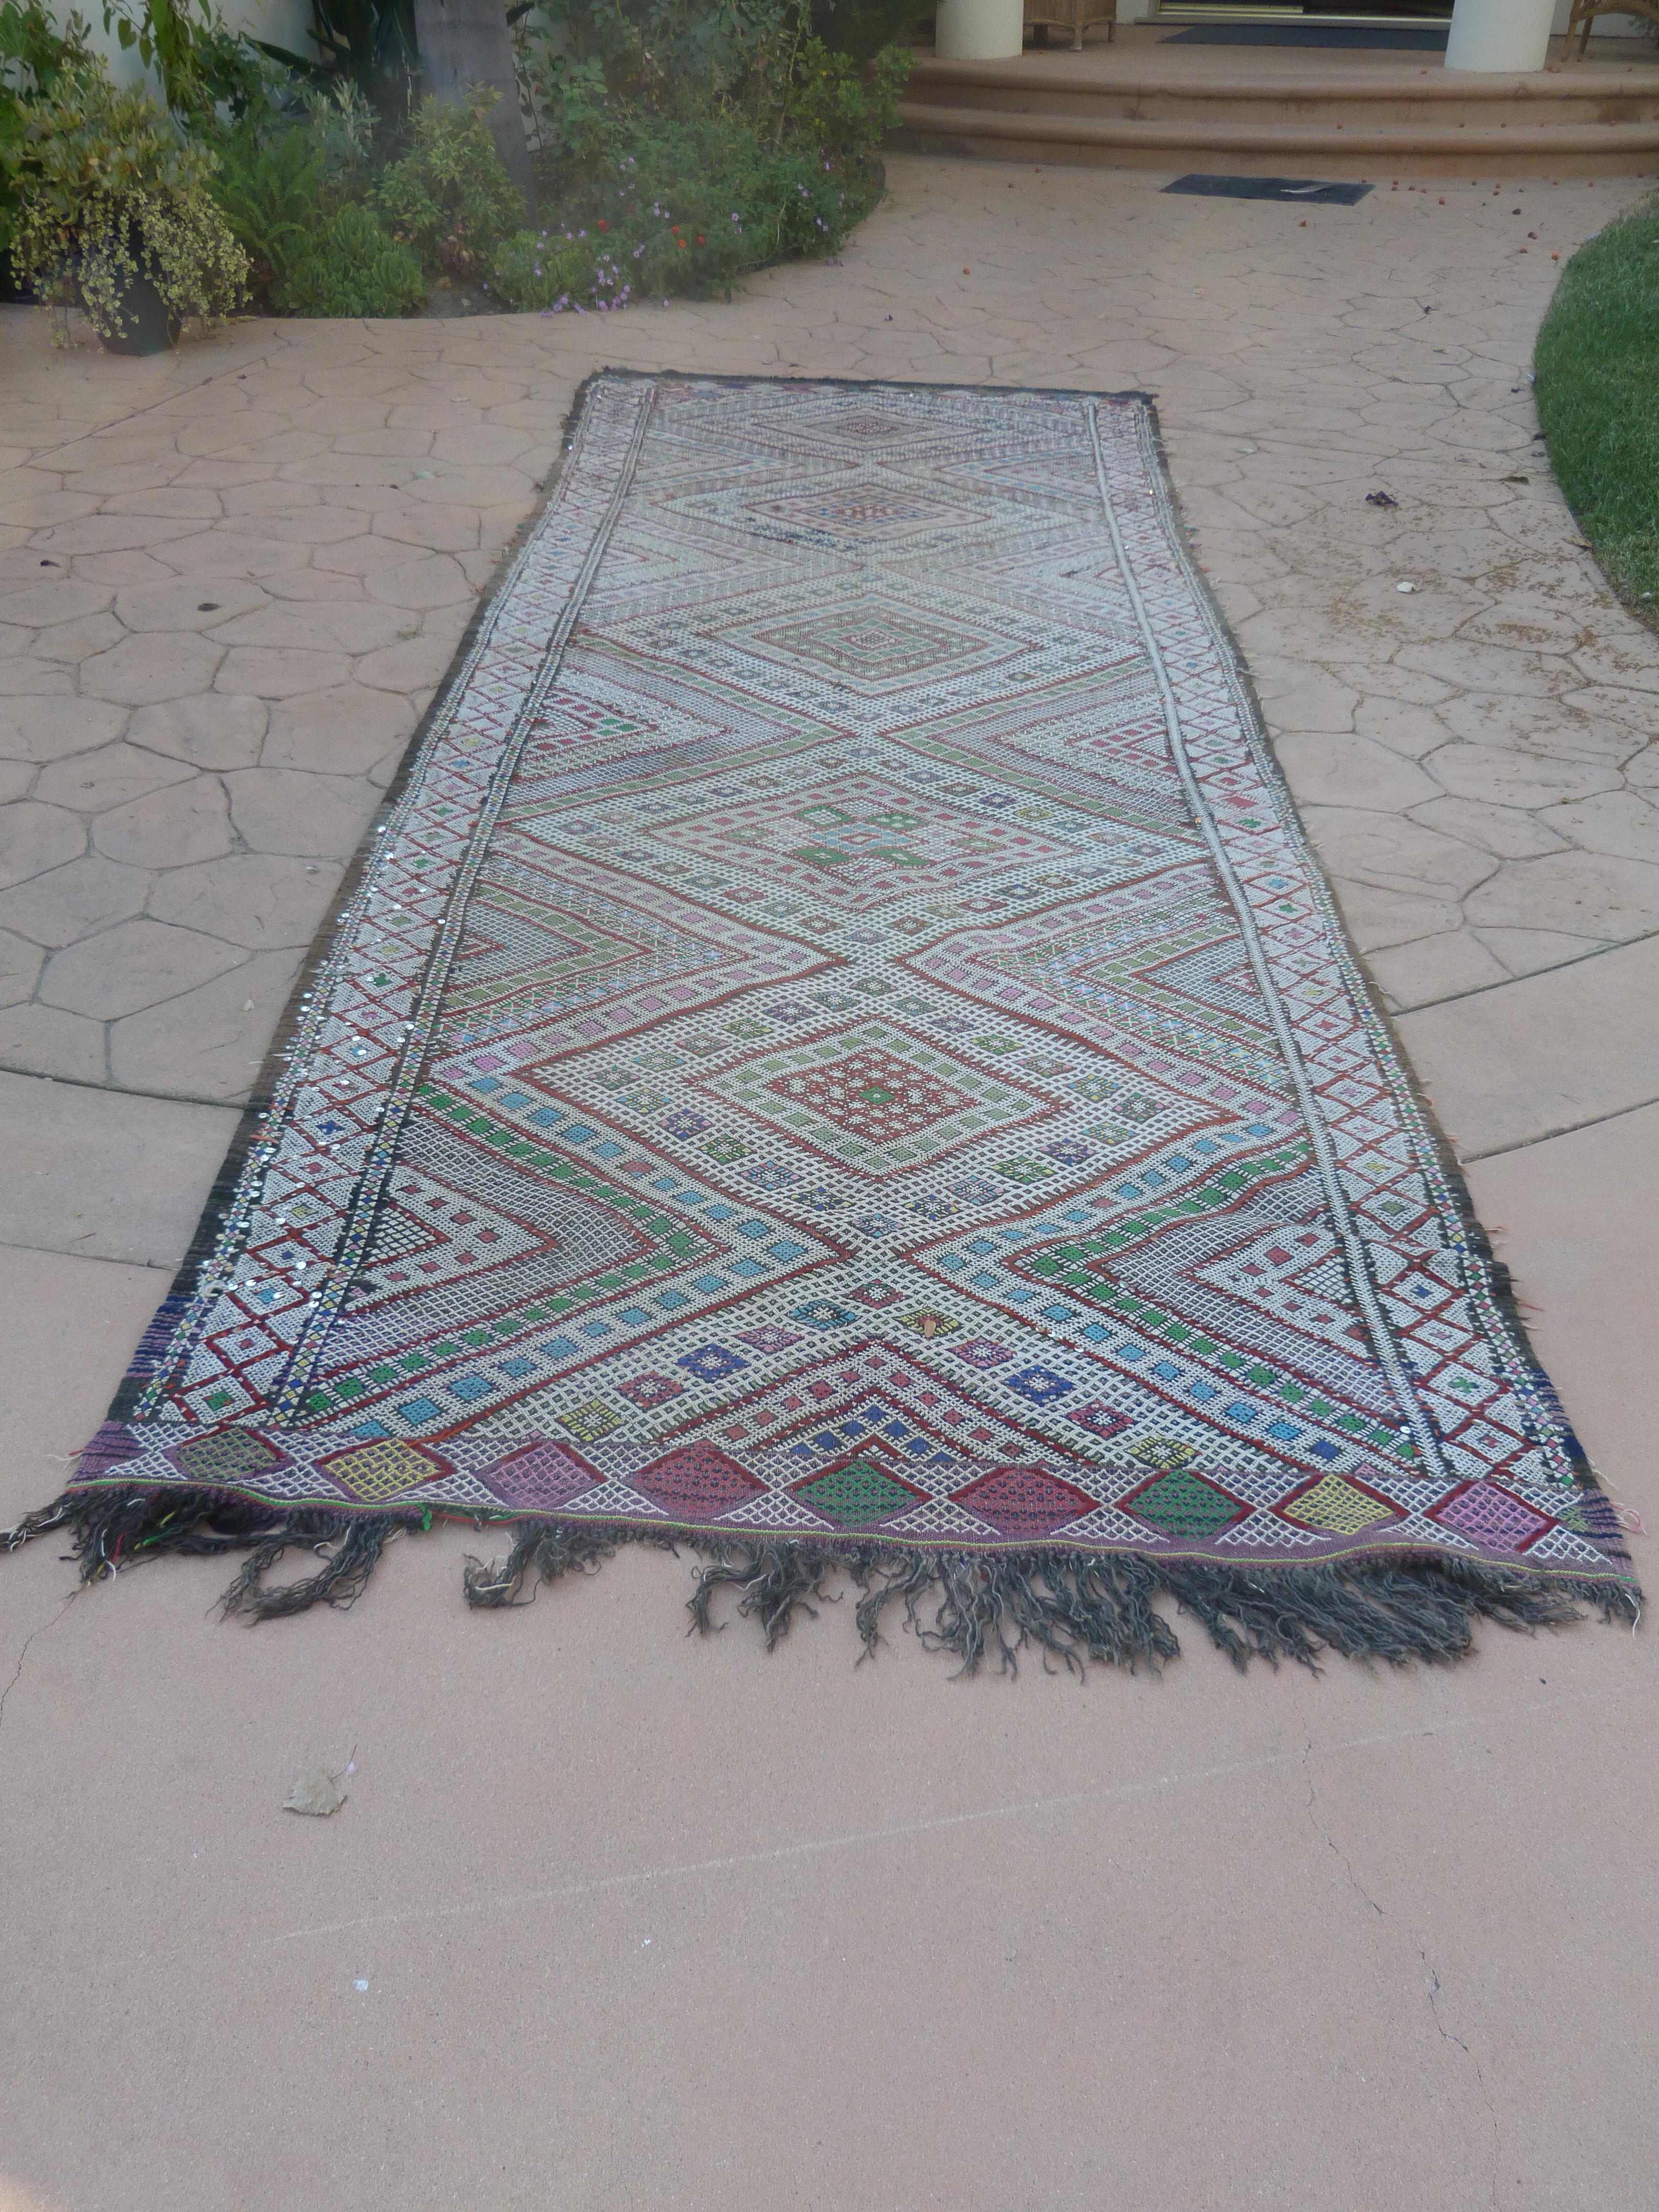 1960 authentic handwoven vintage clector African Moroccan Zemmour tribal runner rug.Intricate geometric designs on flat-weave Tuareg kilim rug, with some sequins.Great faded cors.Unique and beautif abstract work of Art, will add warm in a modernist